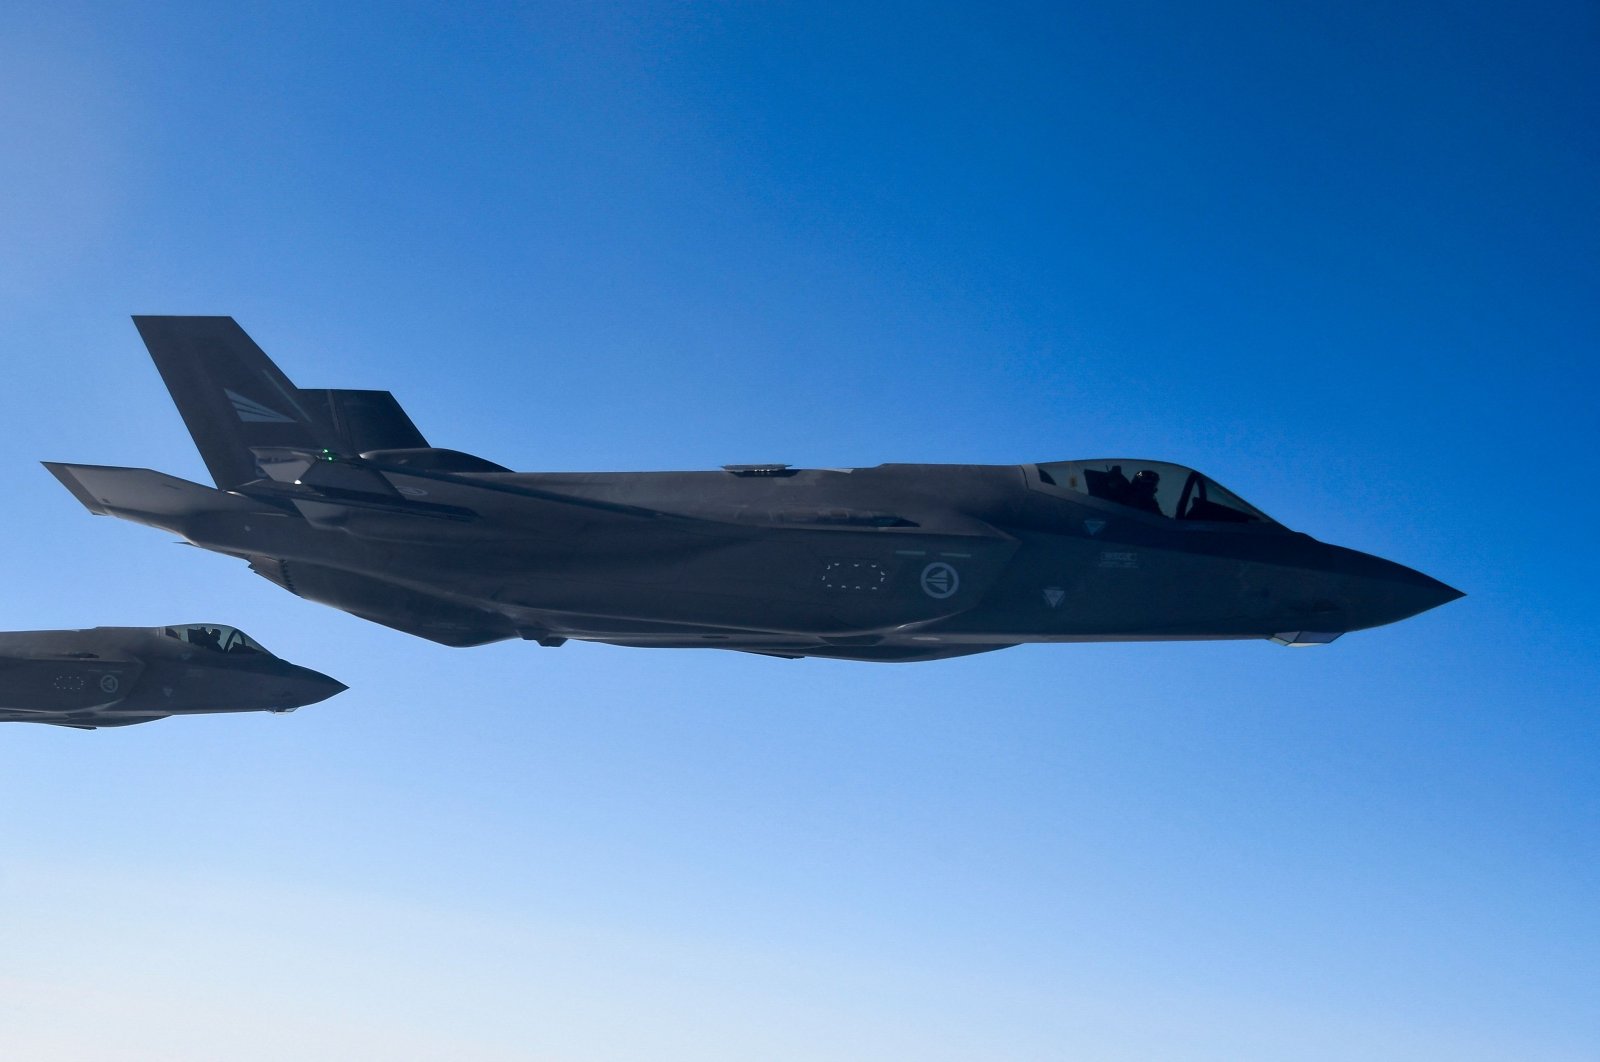 Norwegian F-35 fighter jets fly during NATO exercise "Cold Response" over Norway, March 22, 2022. (AFP Photo)